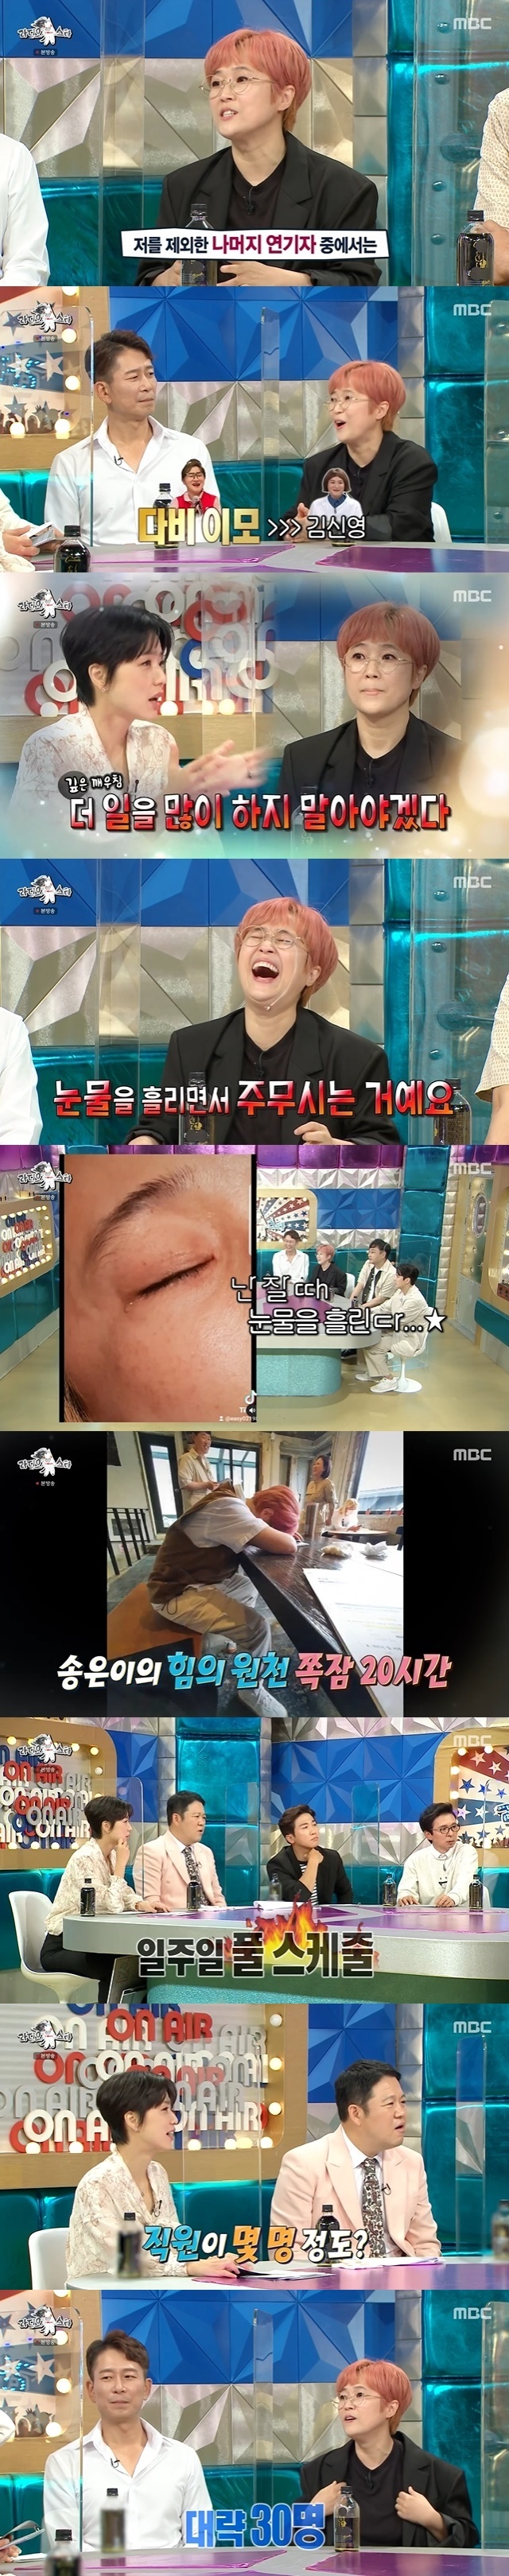 Song Eun-yi, a representative of 30 well-known employees, told Haru that he was busy to maintain the top spot in the company.MBC entertainment program Radio Star broadcast on July 14th 729 times I am busy!Hyundai Society special feature, four people who are short of 10 bodies, Yang Jae-jin, Song Eun-yi, Kim Soo-yong and Kim Sang-hyuk appeared as guests.Song Eun-yi has been working as a representative of Media Lab SISO, which includes members Kim Shin-young, Shin Bong-sun, Ahn Young Mi, and Yoo Jae-hwan of Self Five, and a representative of Content Lab Bibo, which produces various field contents.However, if you pick up Song Eun-yi and re-enter the top spot in sales, the main character is you.I really work without a break, I do not work much, said Ahn Young Mi, who usually watches Song Eun-yi.I look at my senior and think that I should not do much work. Not long ago, Song Eun-yi came to his house and fell asleep, but the tear in his eyes was so salty.Im confident of 20 hours of sleep, Ahn Young Mi said.Song Eun-yi said of his own schedule: I cant even get a Haru a week off, he said, adding: I have six fixed pros and three company-produced content.I am also appearing and planning myself. Song Eun-yi has also unveiled a major project that is being pursued recently.Davi, Actor Lamiran, singer Miran, ITZY (there are) and other stars named How to spend 2021 well were together.Song Eun-yi raised expectations with the words were ready by October.Song Eun-yi also showed a short sadness about his entertainer Ahn Young Mi.He said that the management philosophy is shaken because of Ahn Young Mi, and that everyone is actively involved, and Ahn Young Mi refuses to do things he does not know well.When a member of the party comes in and says, How about a schedule, everyone is seriously worried, but Ahn Young Mi alone said, I am not attracted.Song Eun-yi said: I respect the choice of Mr. Ahn Young Mi, but I dont know why when I hear the pro that I refused.Steel Unit MC came in, refused, and a large company broadcasts on SNS, and the president said he would come out directly.I said that MC would like to have Ahn Young Mi, he said.  (It was also likeSong Eun-yi said to Kim Gu, who asked about the size of the company, If you do external partners, you will have about 30 people.He also said that all the employees are assaulted by facts. I am a representative of my own, but when I talk about it, I boo it.Once the employees were there, he said, laughing at the atmosphere of the company.On this day, Song Eun-yi also released anecdotes aimed at managing and transferring content business, and for life reversal with different businesses.If you look back at us, why did you think that? Theres a case. One of them is artificial liver investment.Later, he was drawn to the idea that he was different in size, and he was told that he had developed it, but he was only a ton truck.I can continue to develop it, he said, laughing and sad at the same time.On the other hand, Song Eun-yi attracted attention by revealing his heart to and from cold water and hot water because of his best friend Kim Sook.Song Eun-yi said, Kim Sook recently said that he did not see it because he was not crazy.I made it to work on Double Jeopardy V, and Im busy. So if you try to do Selub Five, why not Double Jeopardy V? I was in a lot of resentment until the end of last year, but it was so good to be in the KBS entertainment Grand Prize.I know all about my relationship with Sook-yi, but I was happy, so I got the answer, I like to be promoted to a husband who does not want to see me.